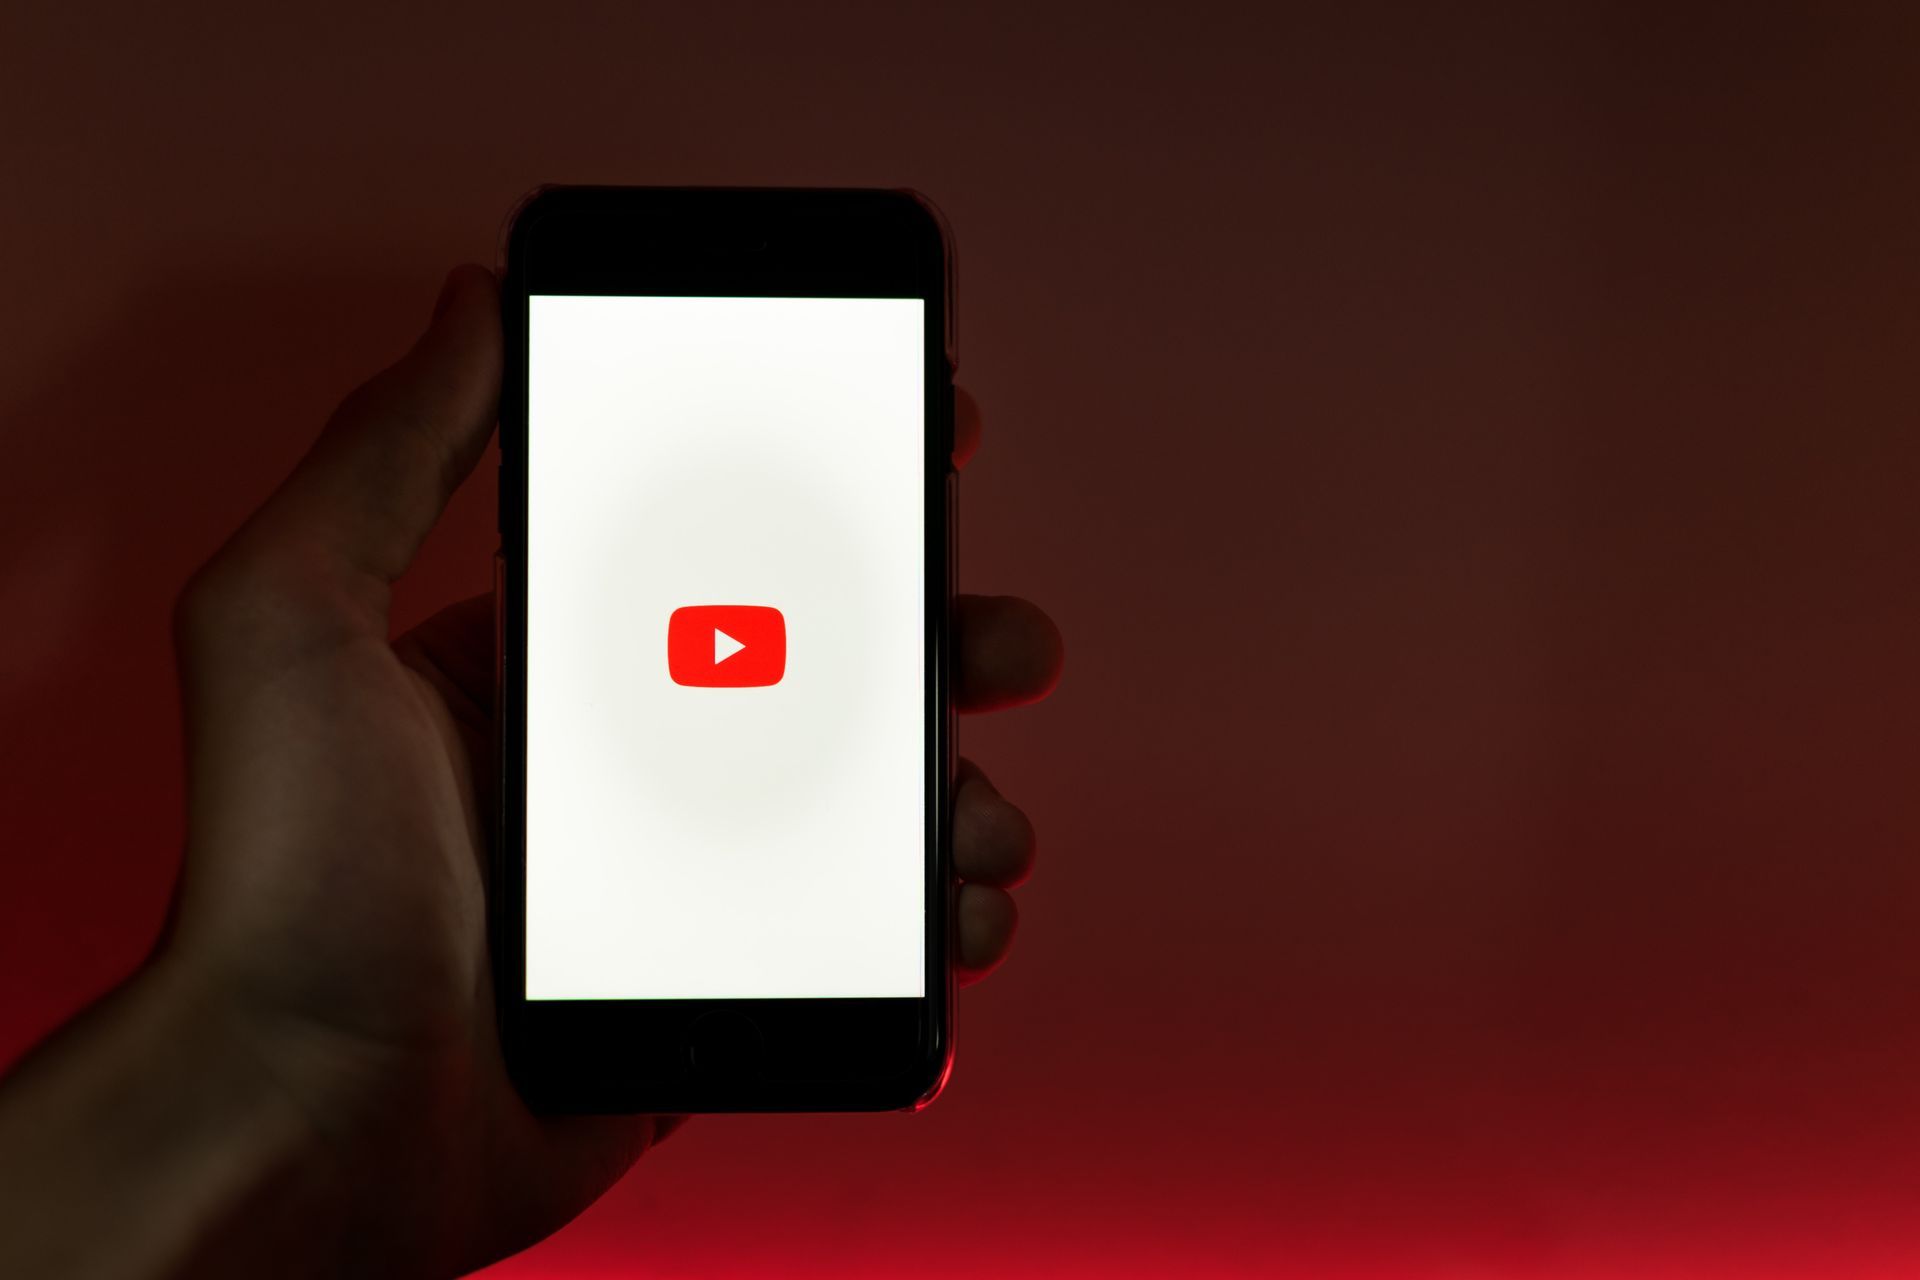 YouTube premium price increase 2023: What is next for subscribers (Image credit)